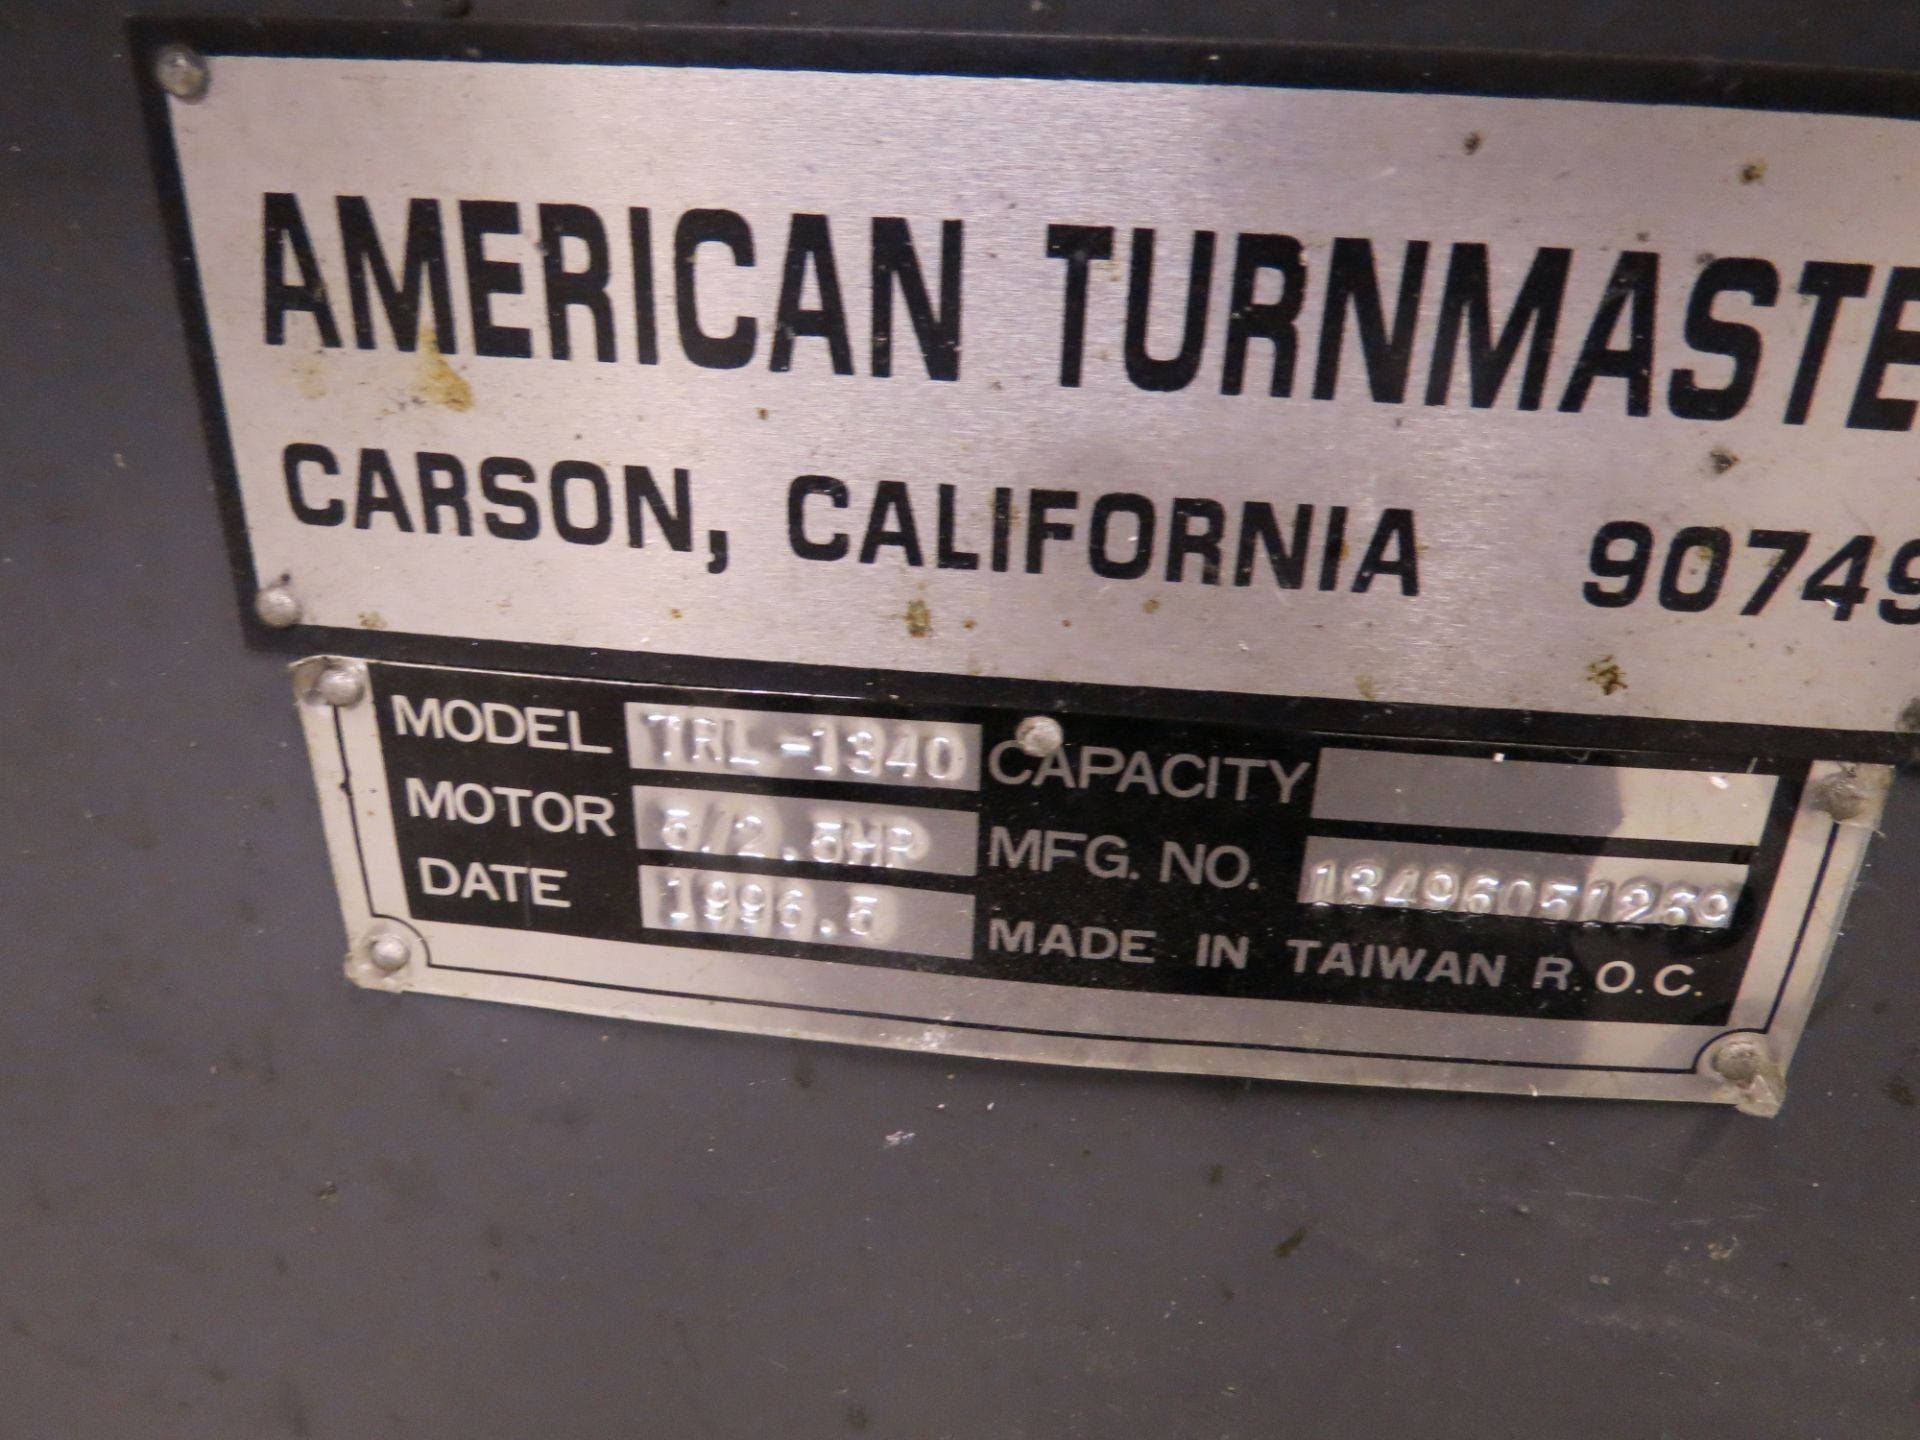 13" x 40" American Turnmaster TRL-1340 Engine Lathe, 3 jaw chuck, tool post, s/n 1349605051269, - Image 4 of 5